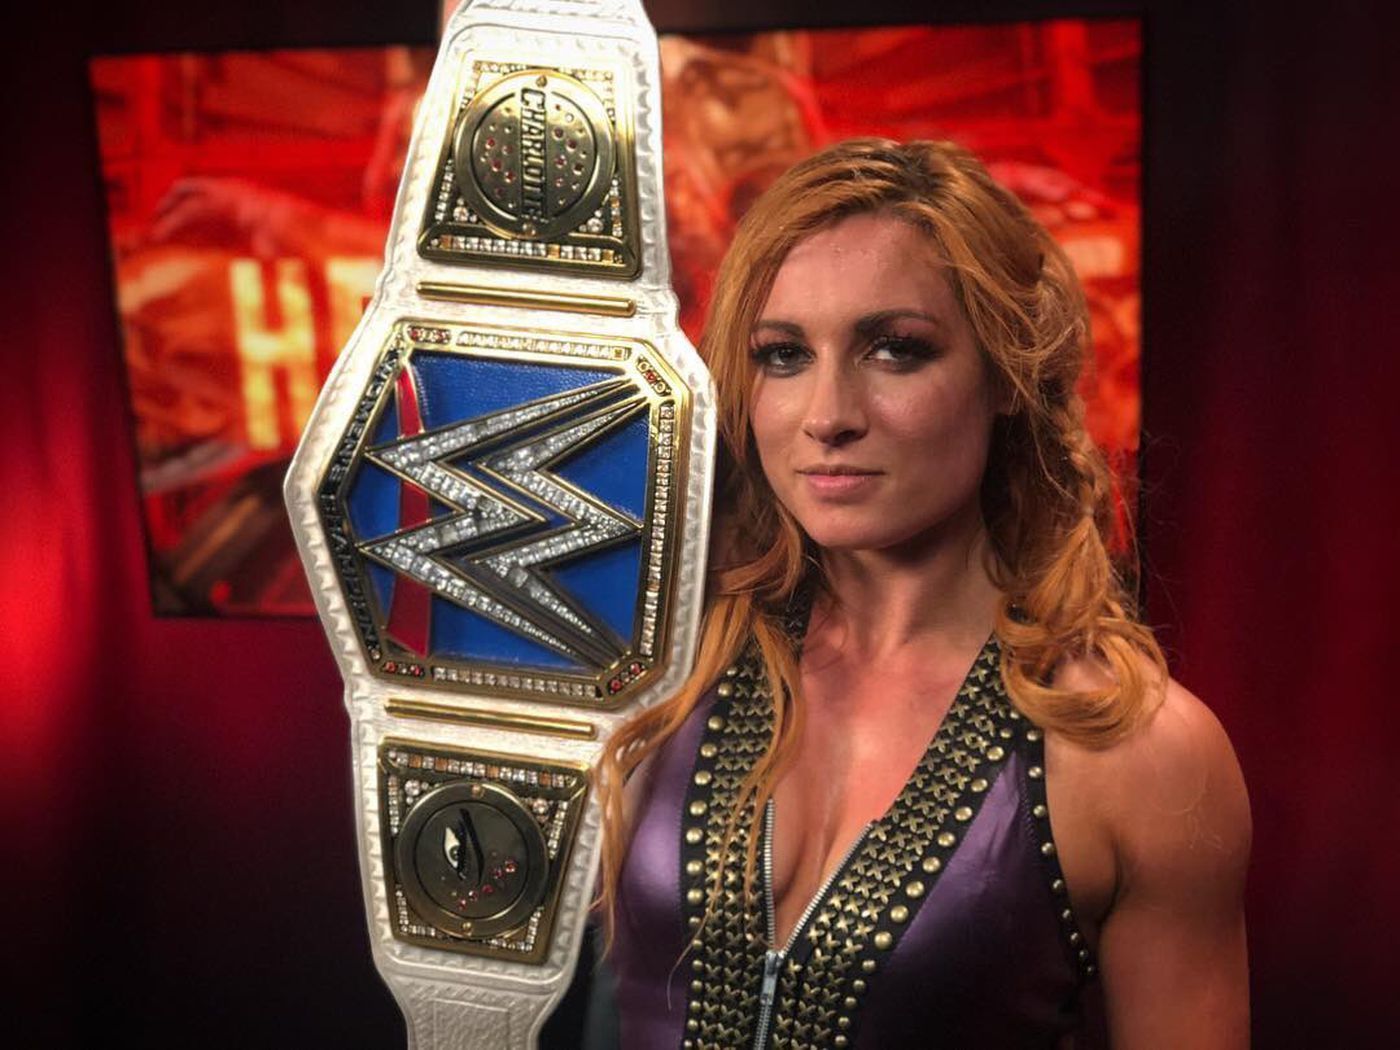 Becky Lynch's first promo as new champ reads 'neutral badass' to